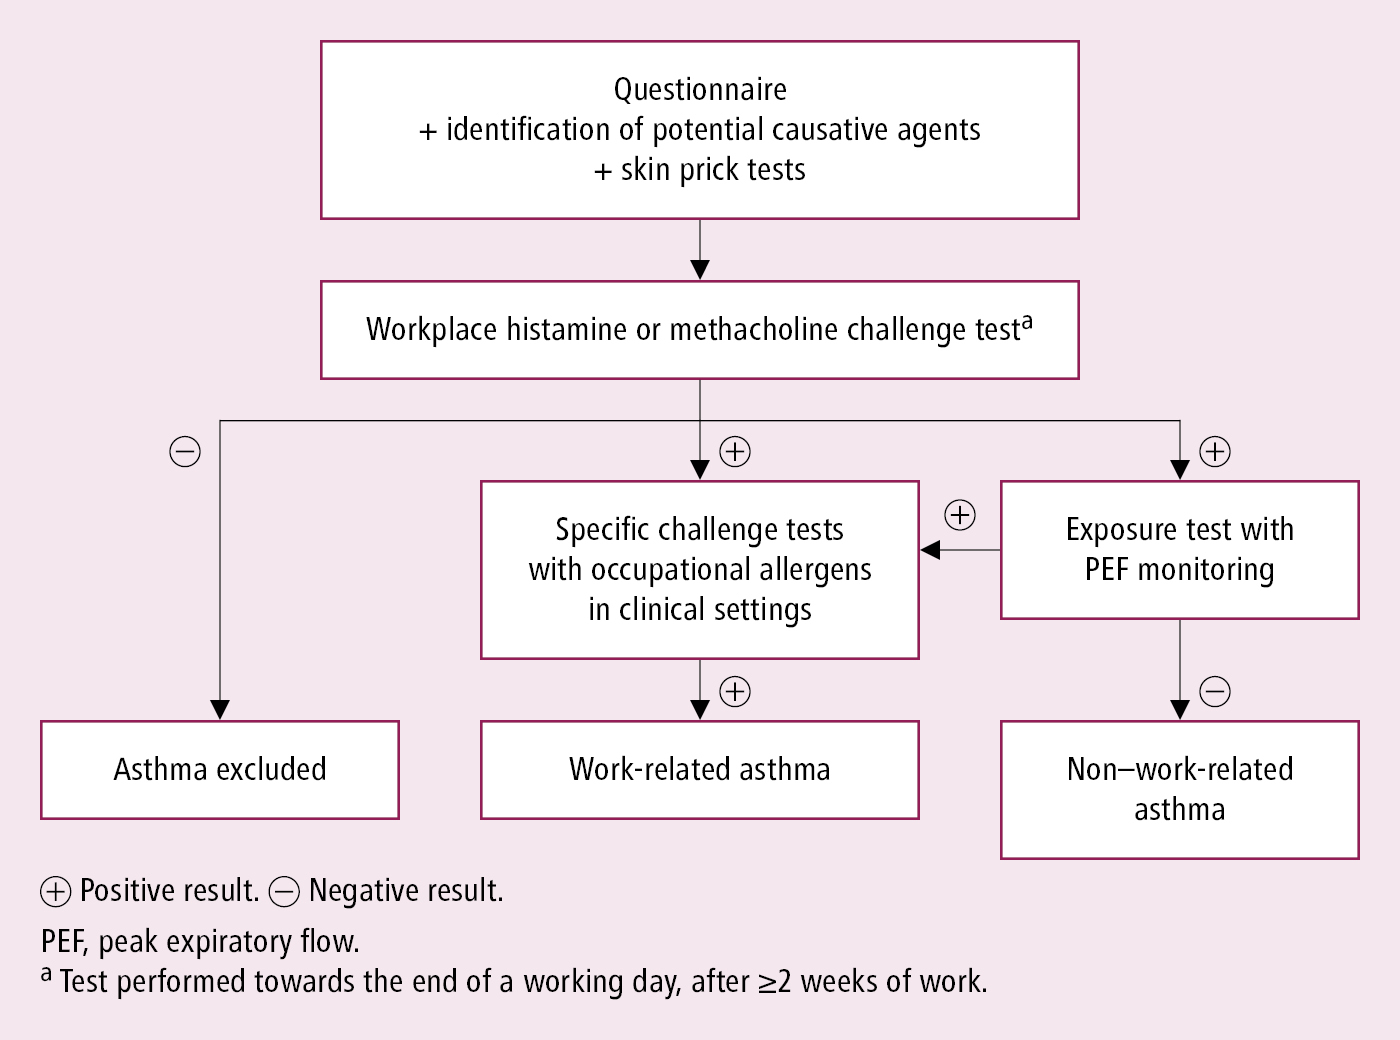 Figure 031_0657.  
Diagnostic workup of work-related asthma. 